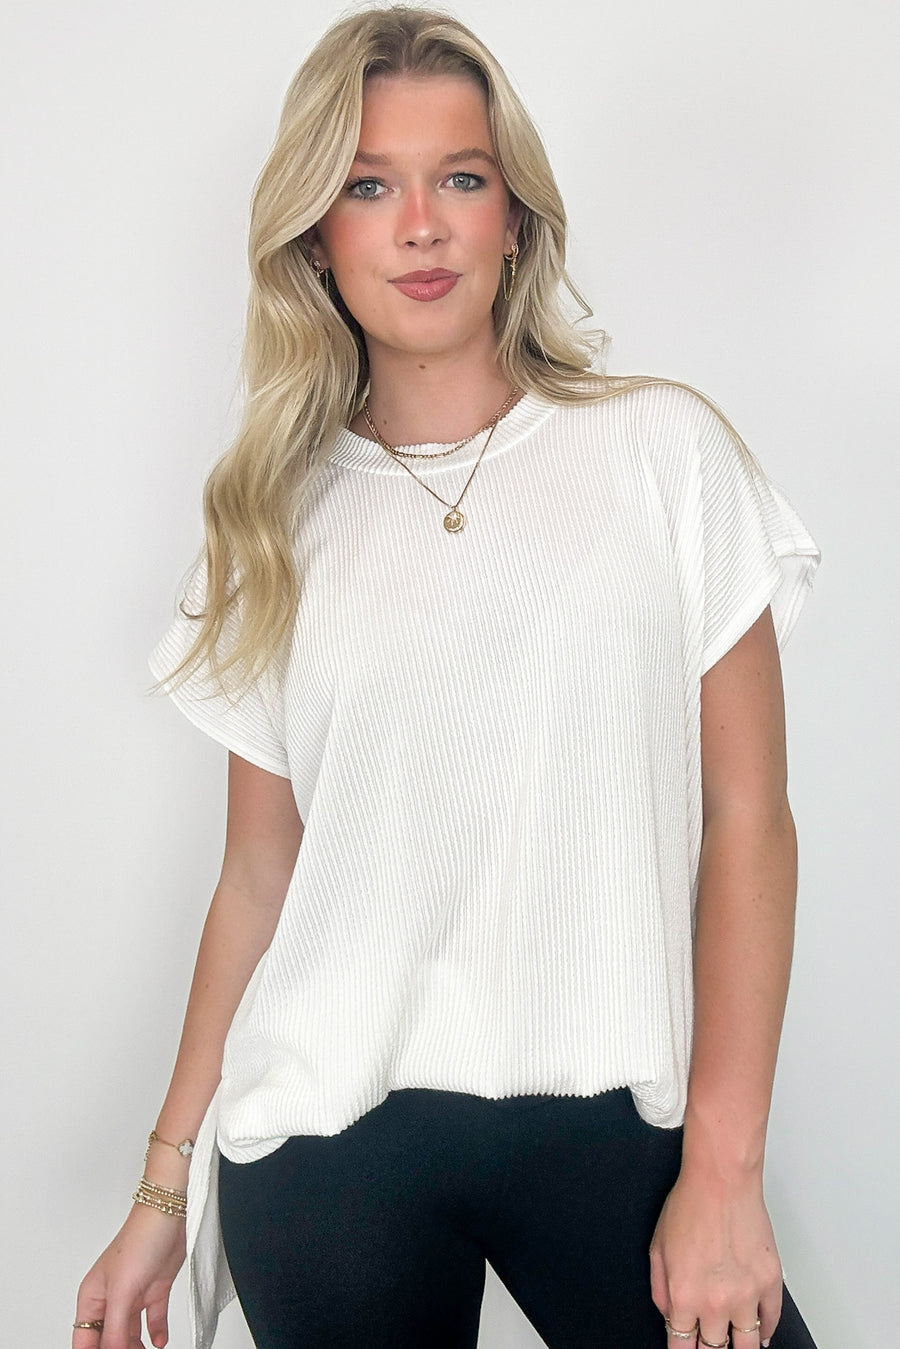 Casual Favorite Short Sleeve Side Slit Tunic Top